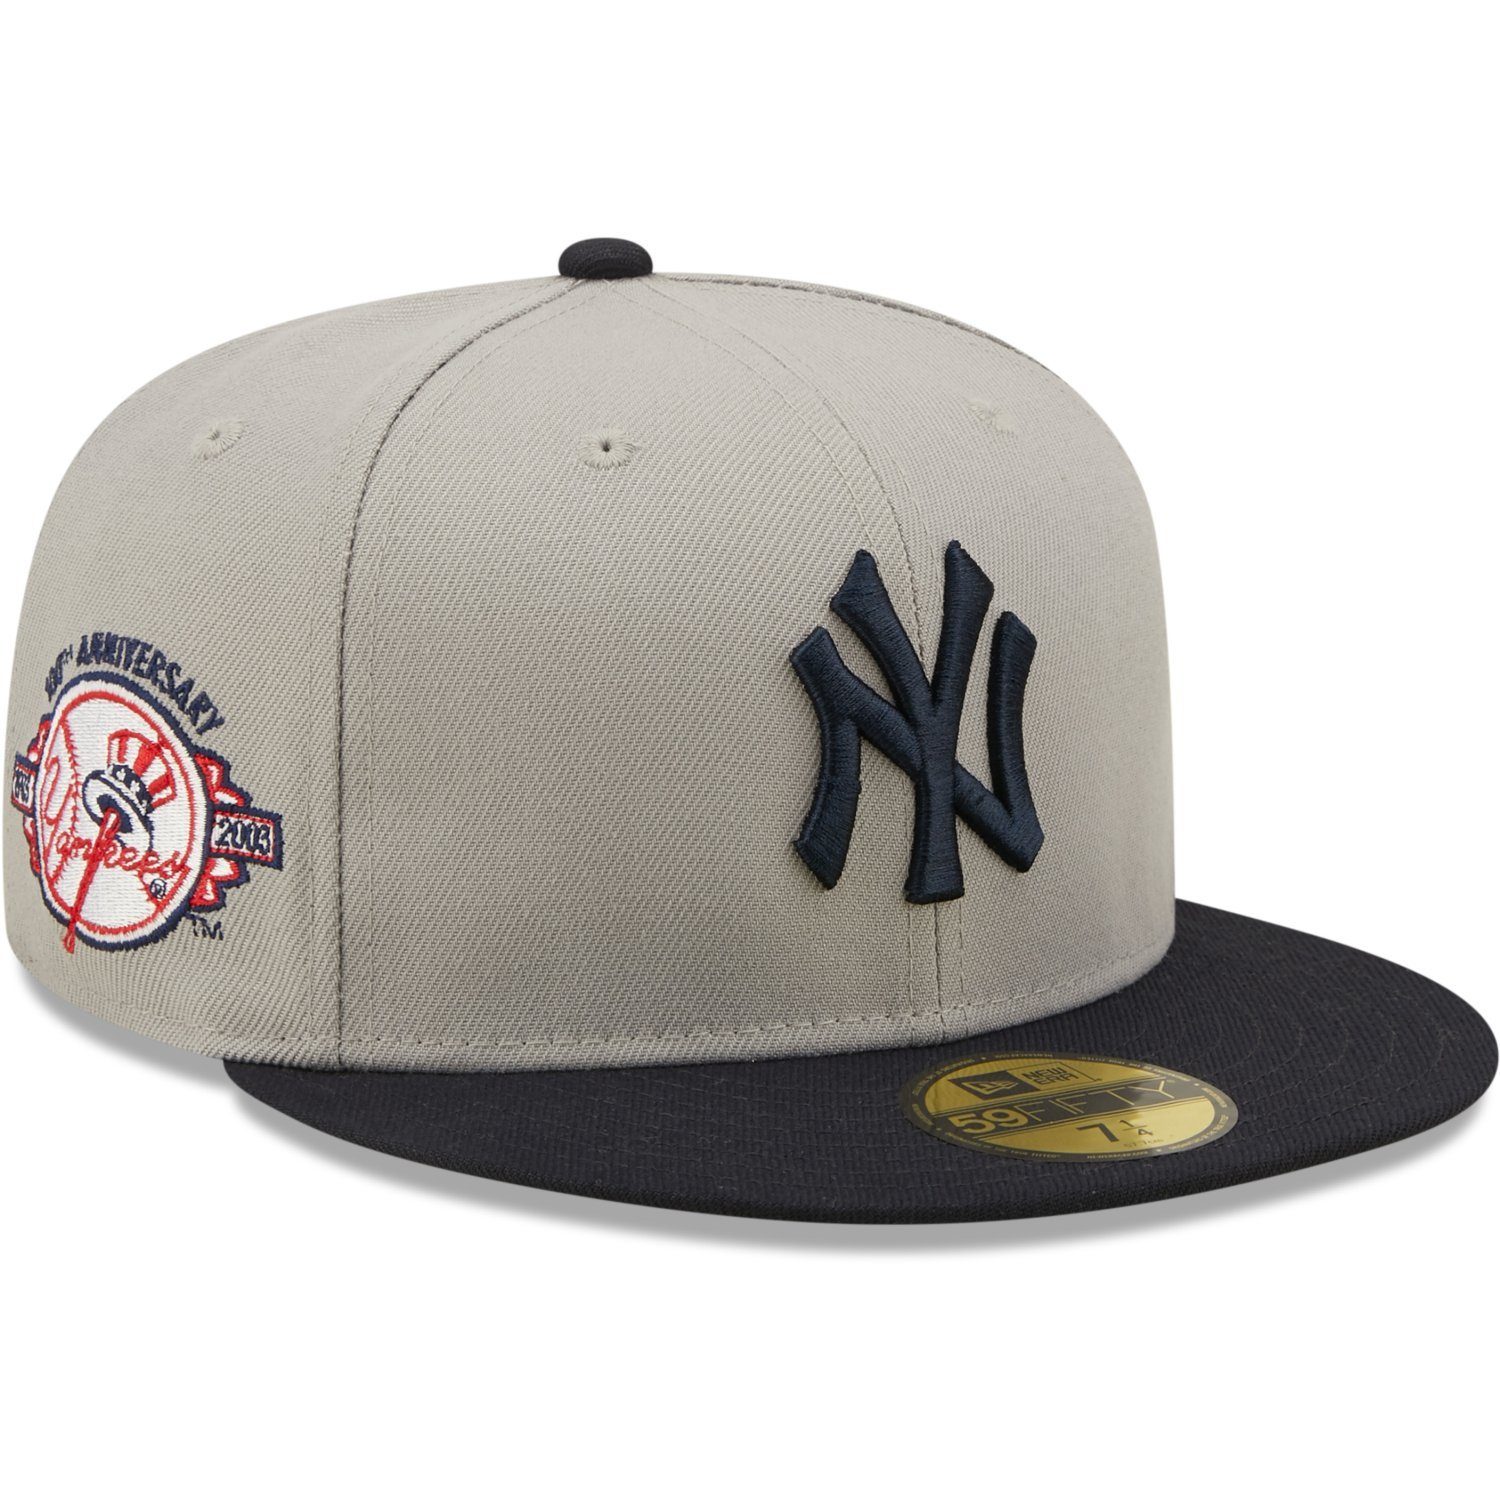 SIDE Cap Yankees Fitted Era New 59Fifty New PATCH York